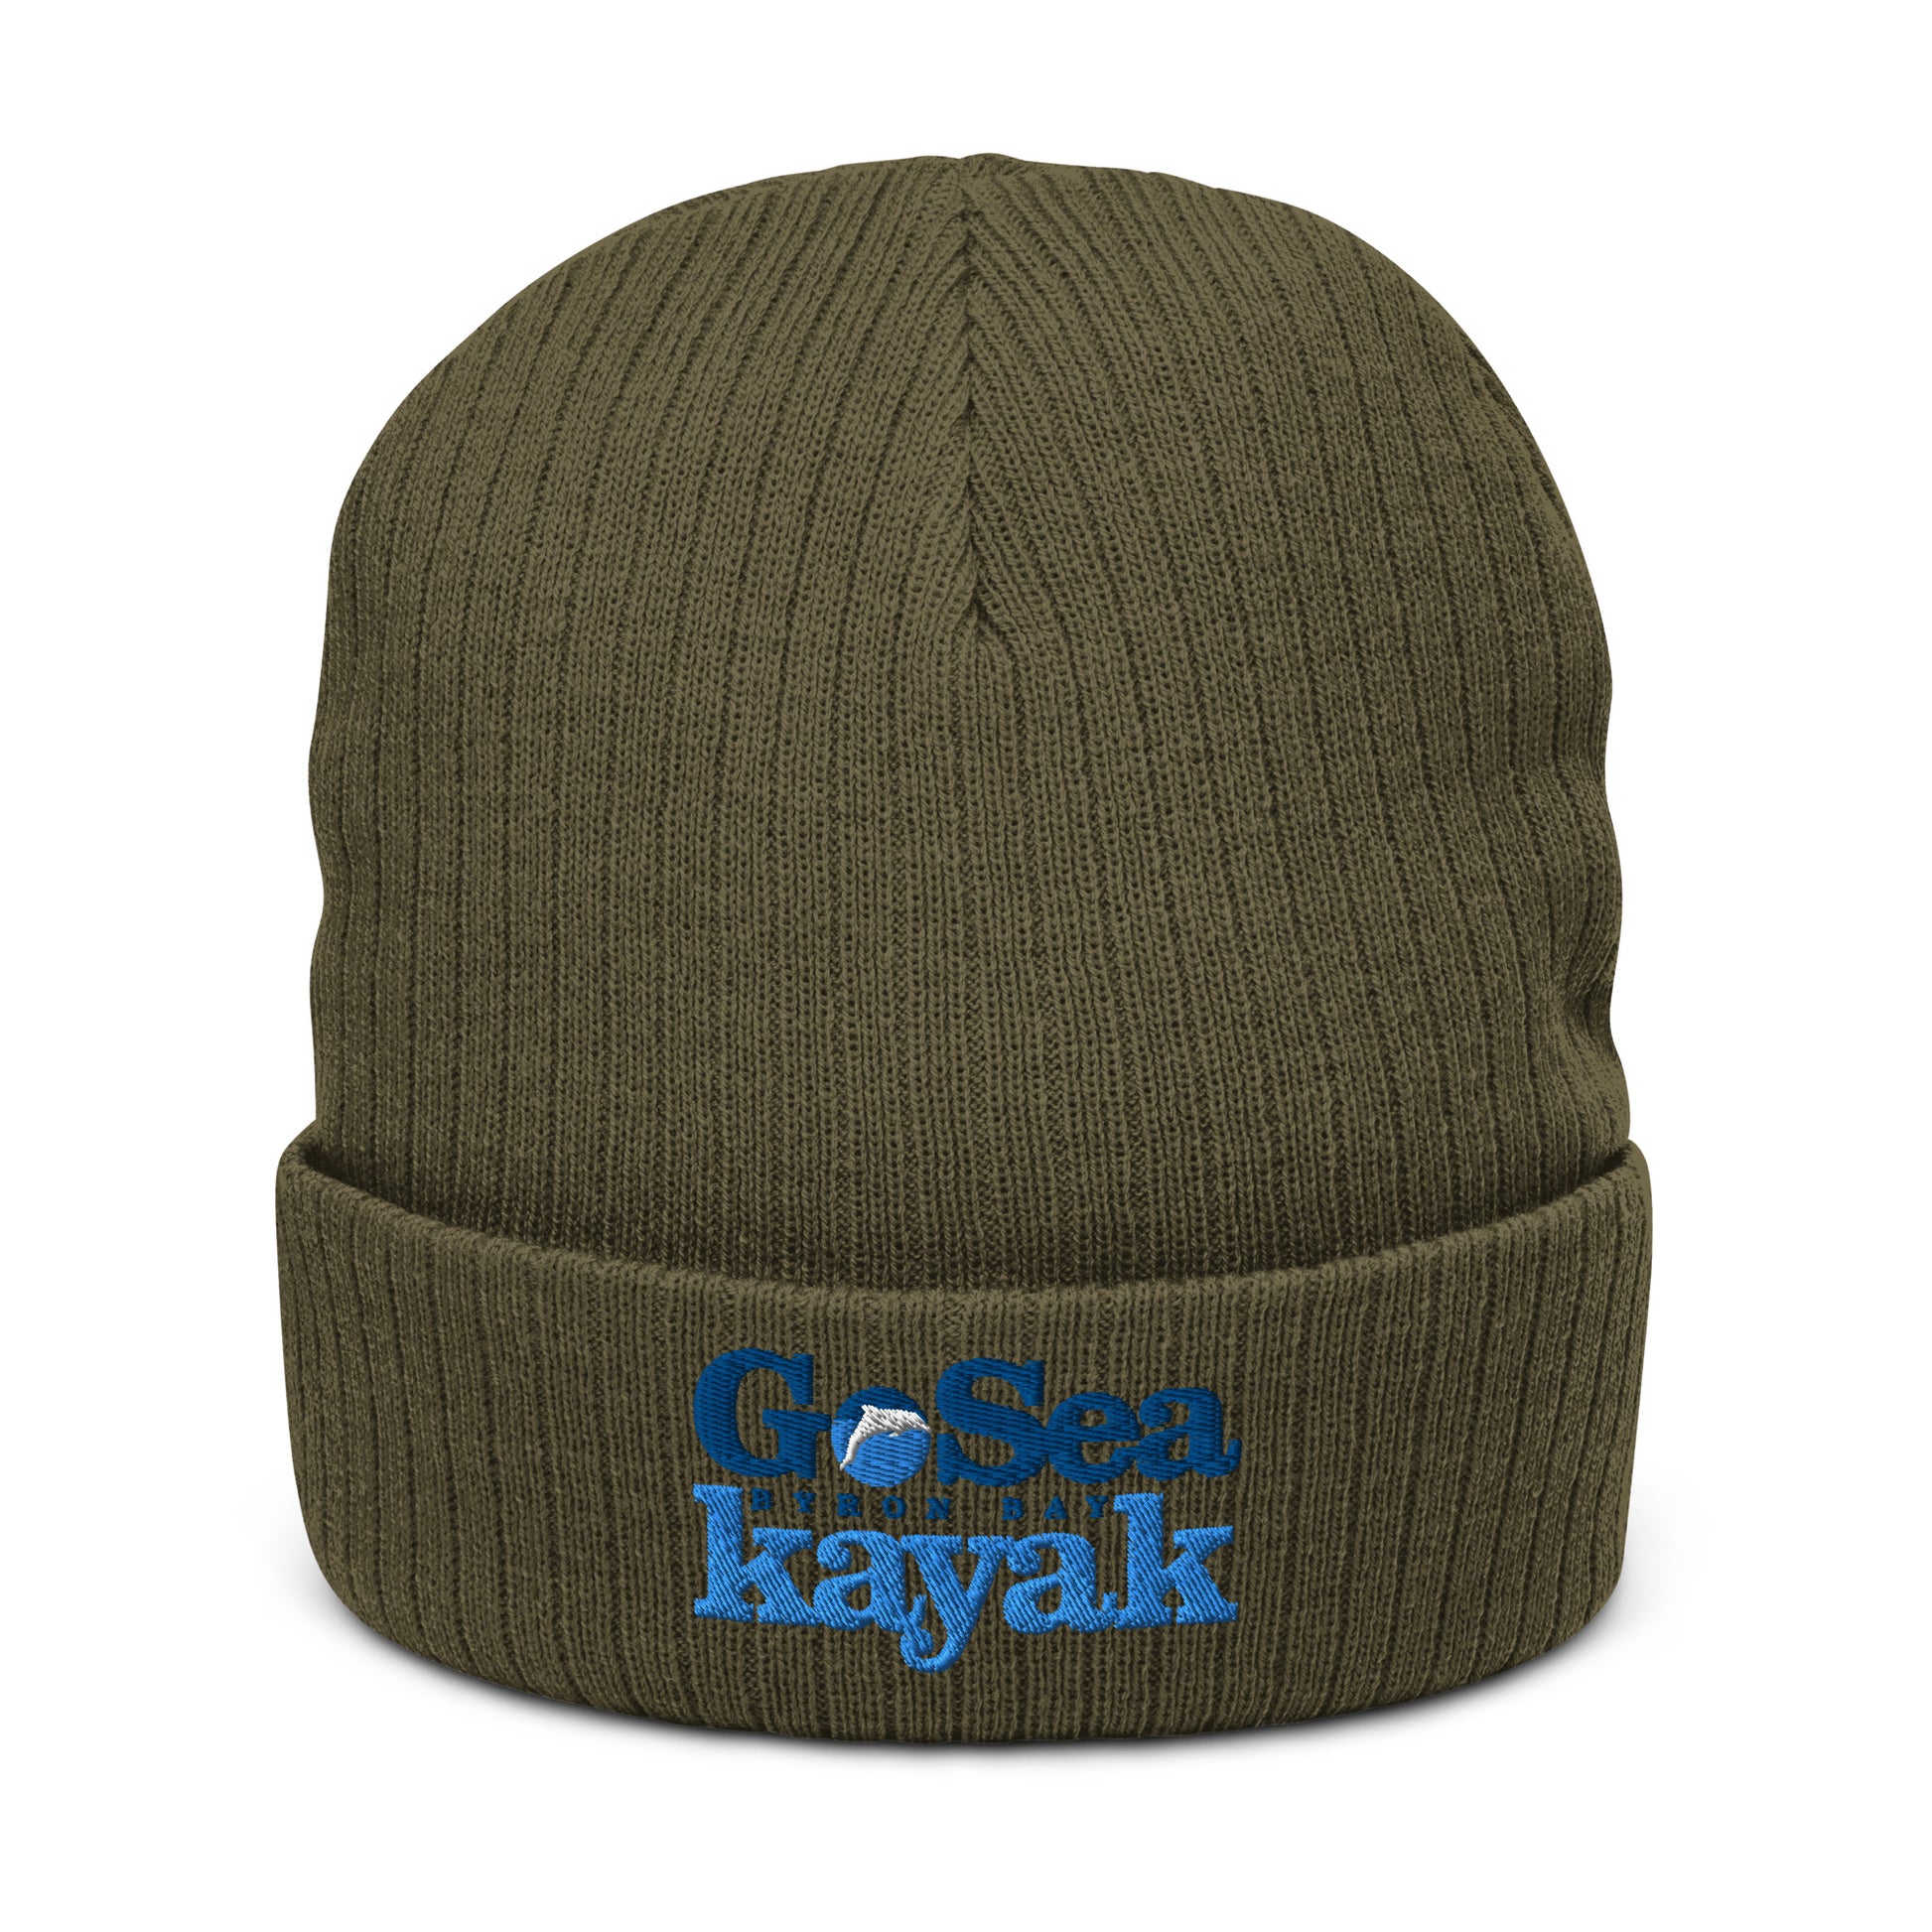  Ribbed Knit Beanie - Recycled polyester - Olive - Front view - Go Sea Kayak Byron Bay logo on front - Genuine Byron Bay Merchandise | Produced by Go Sea Kayak Byron Bay 